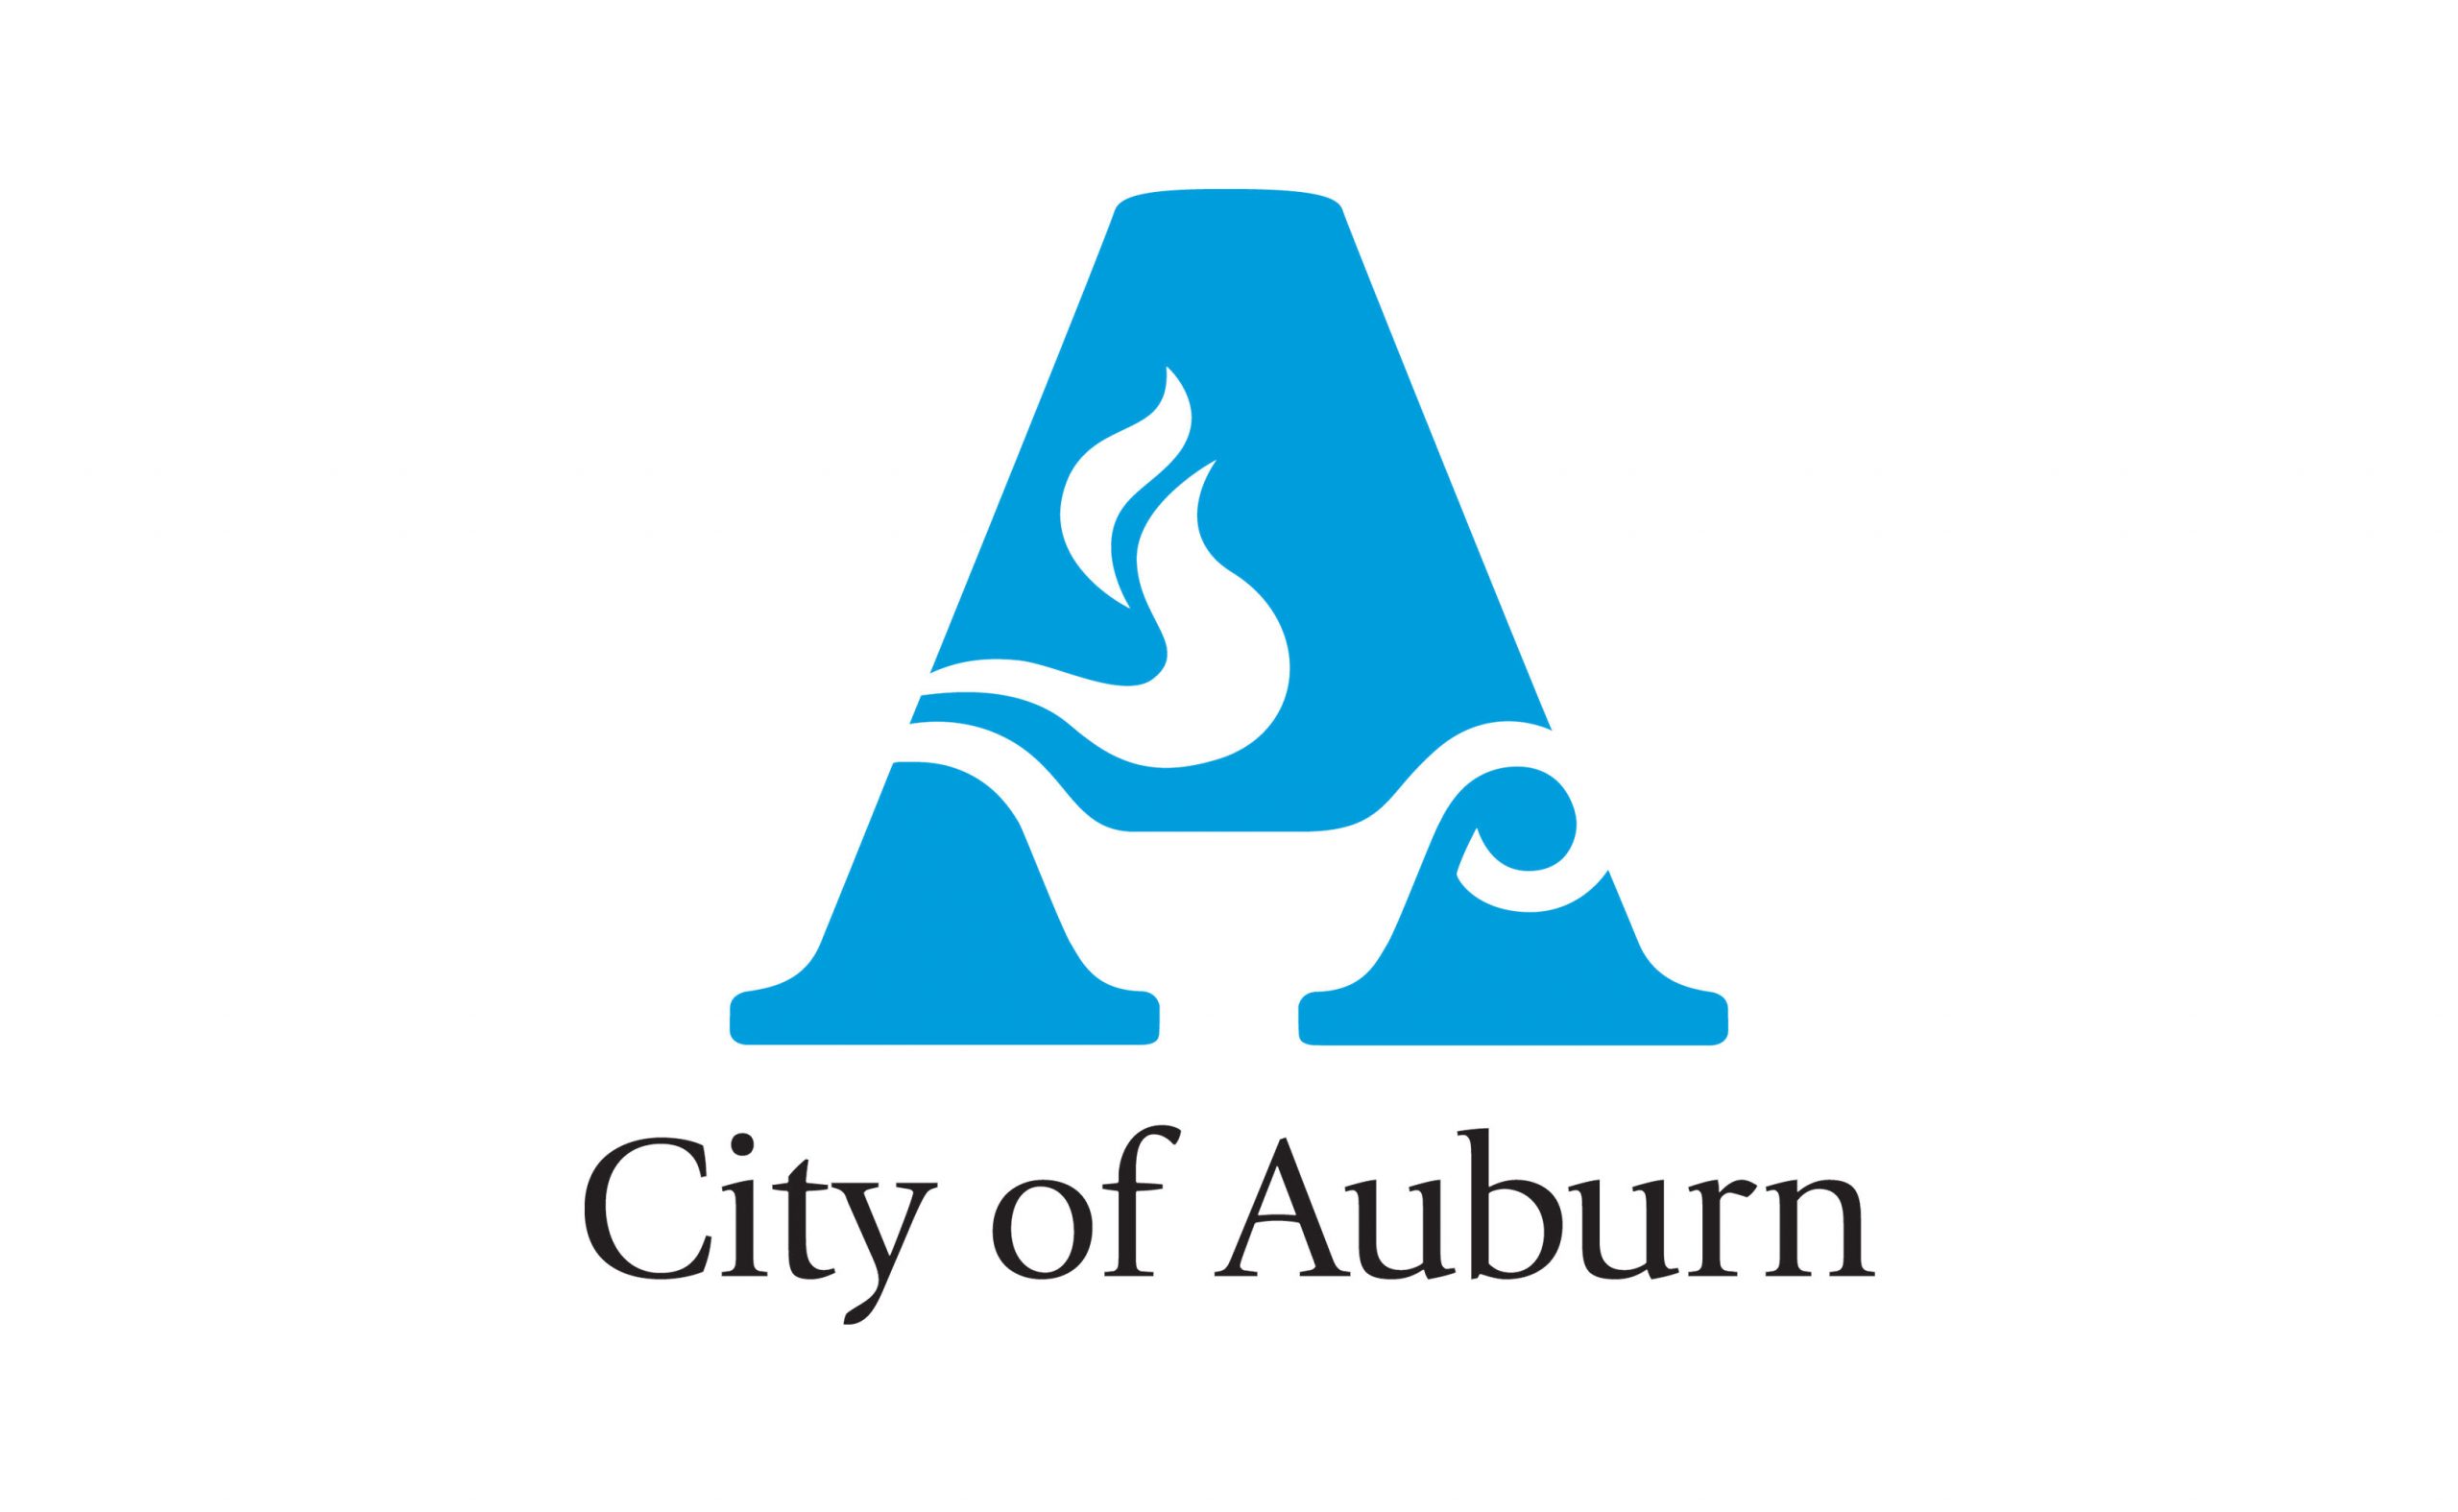 City of Auburn launches interest subsidy program to support struggling businesses